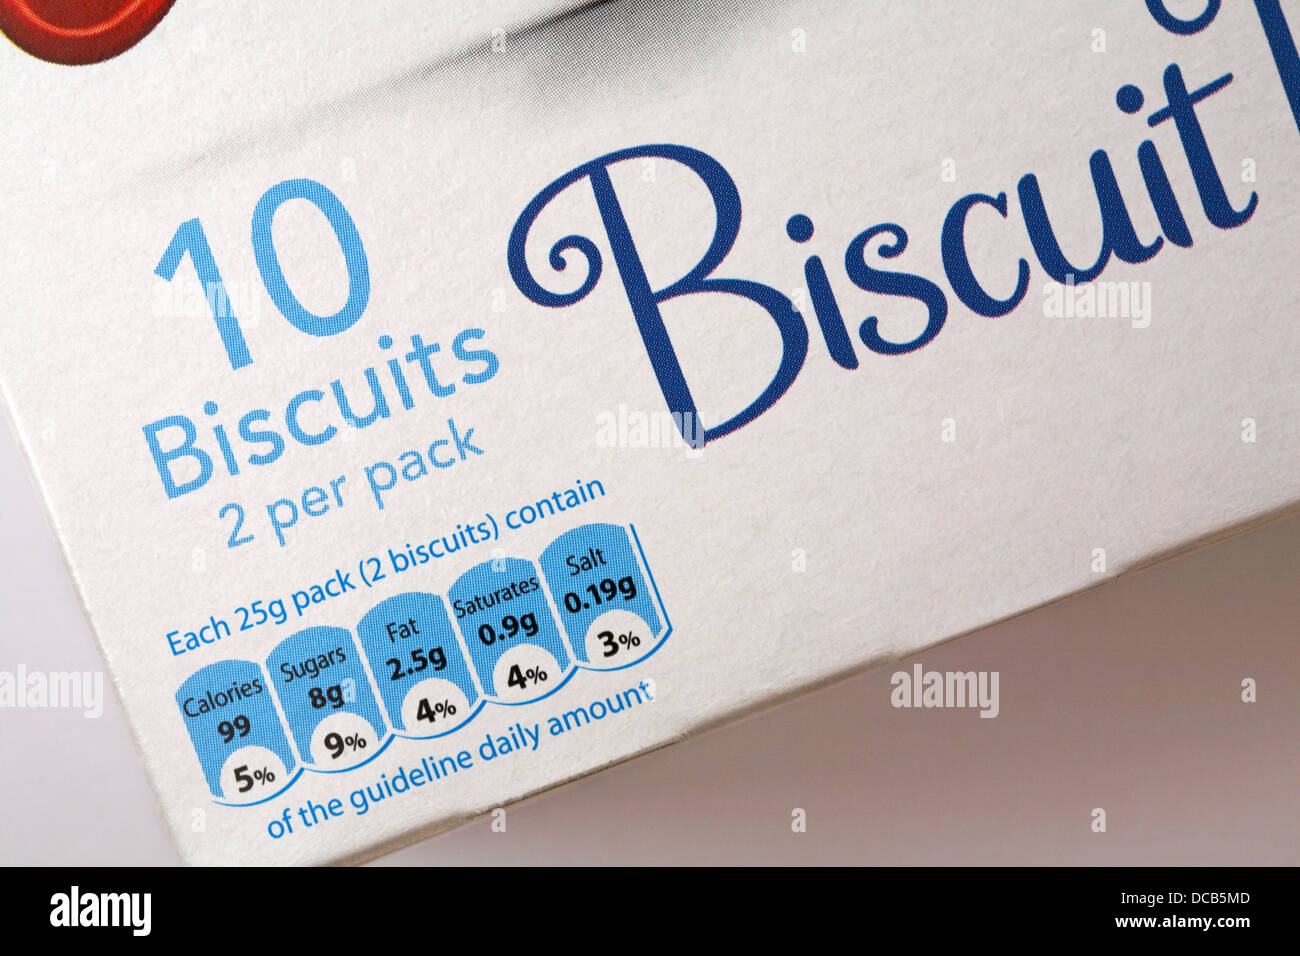 GDA guideline daily amount information on box of biscuits Stock Photo